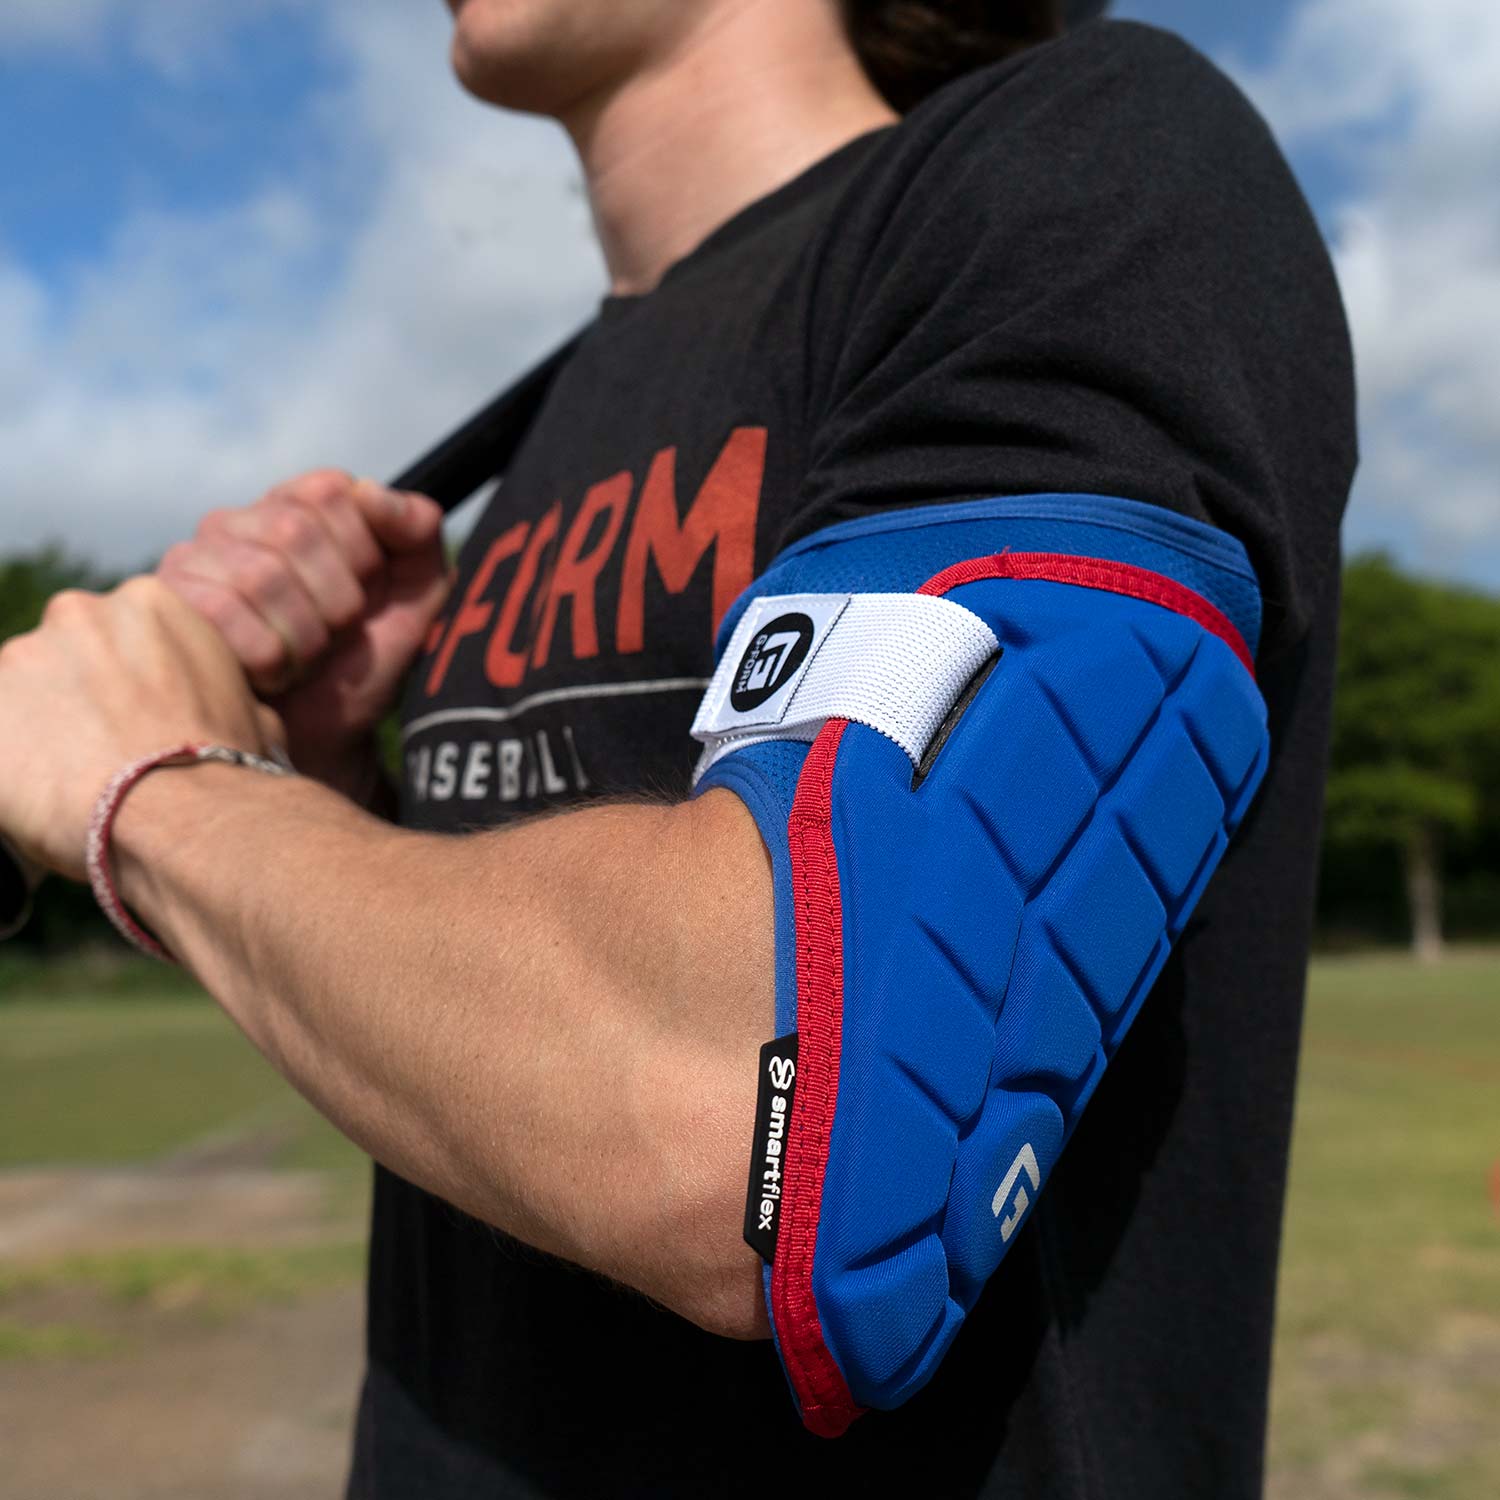 Elite Speed Baseball Batter's Elbow Guard with Adjustable Strap